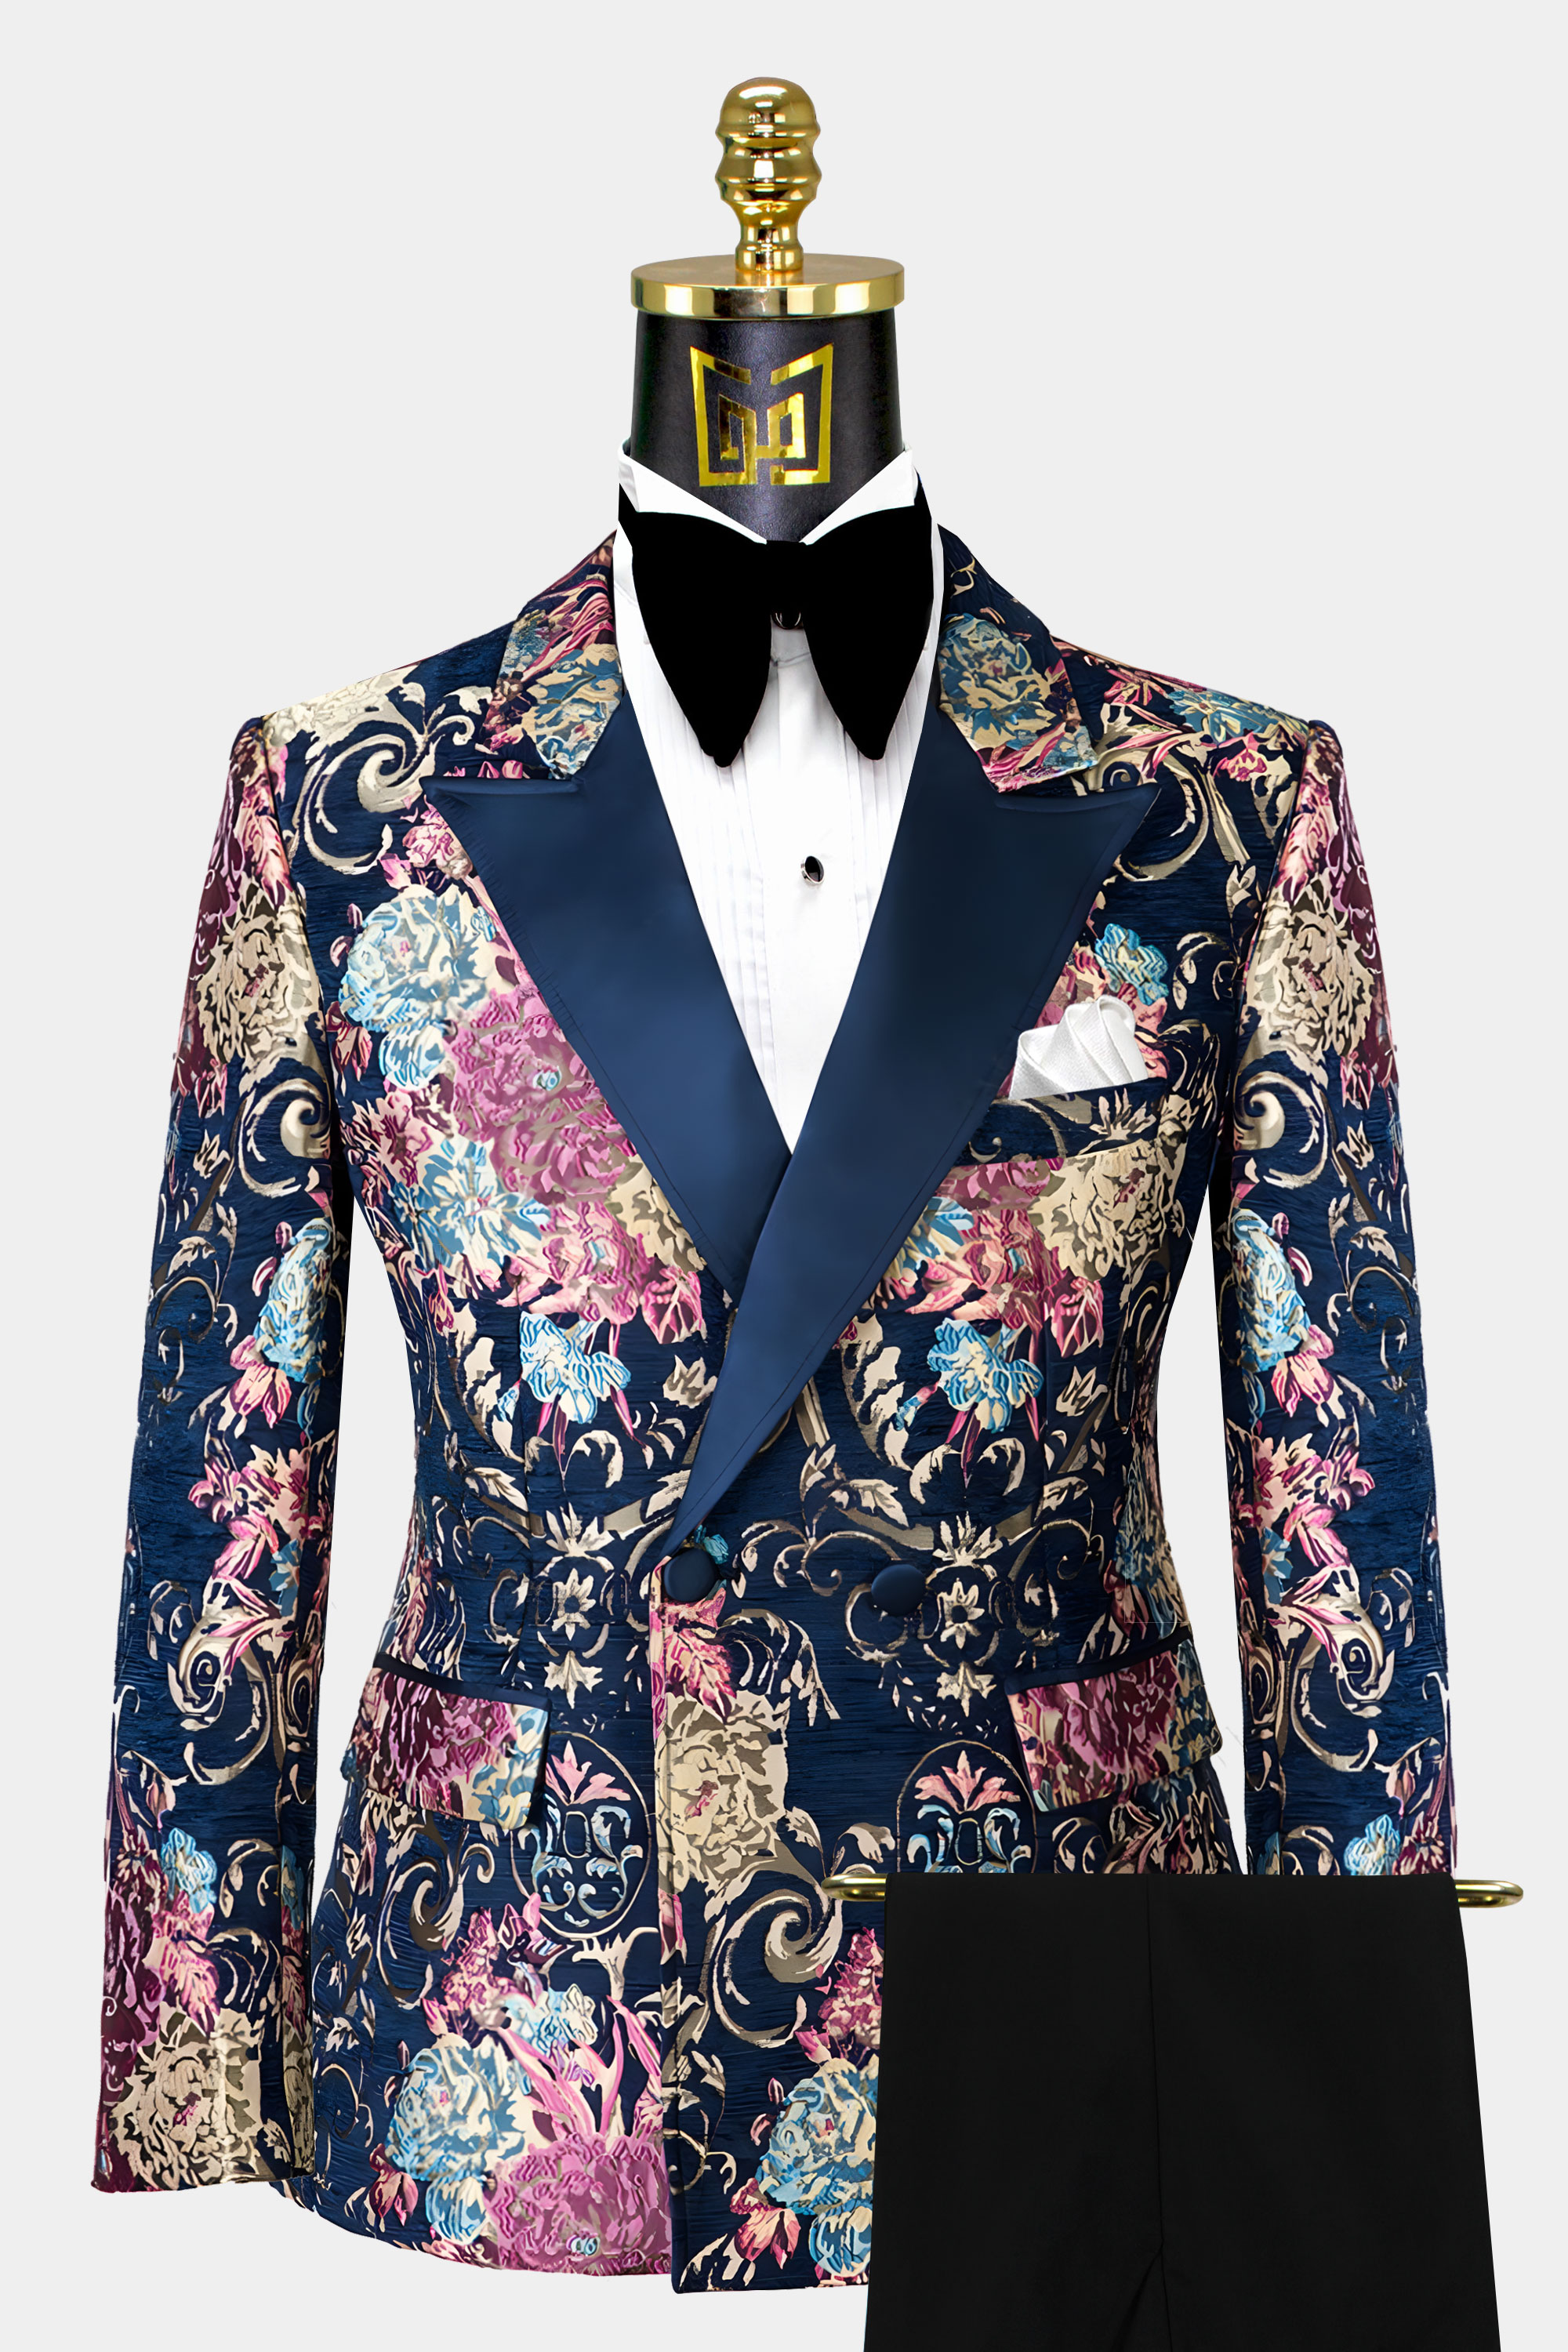 Double Breasted Navy Blue & Gold Floral Tuxedo - 3 Piece